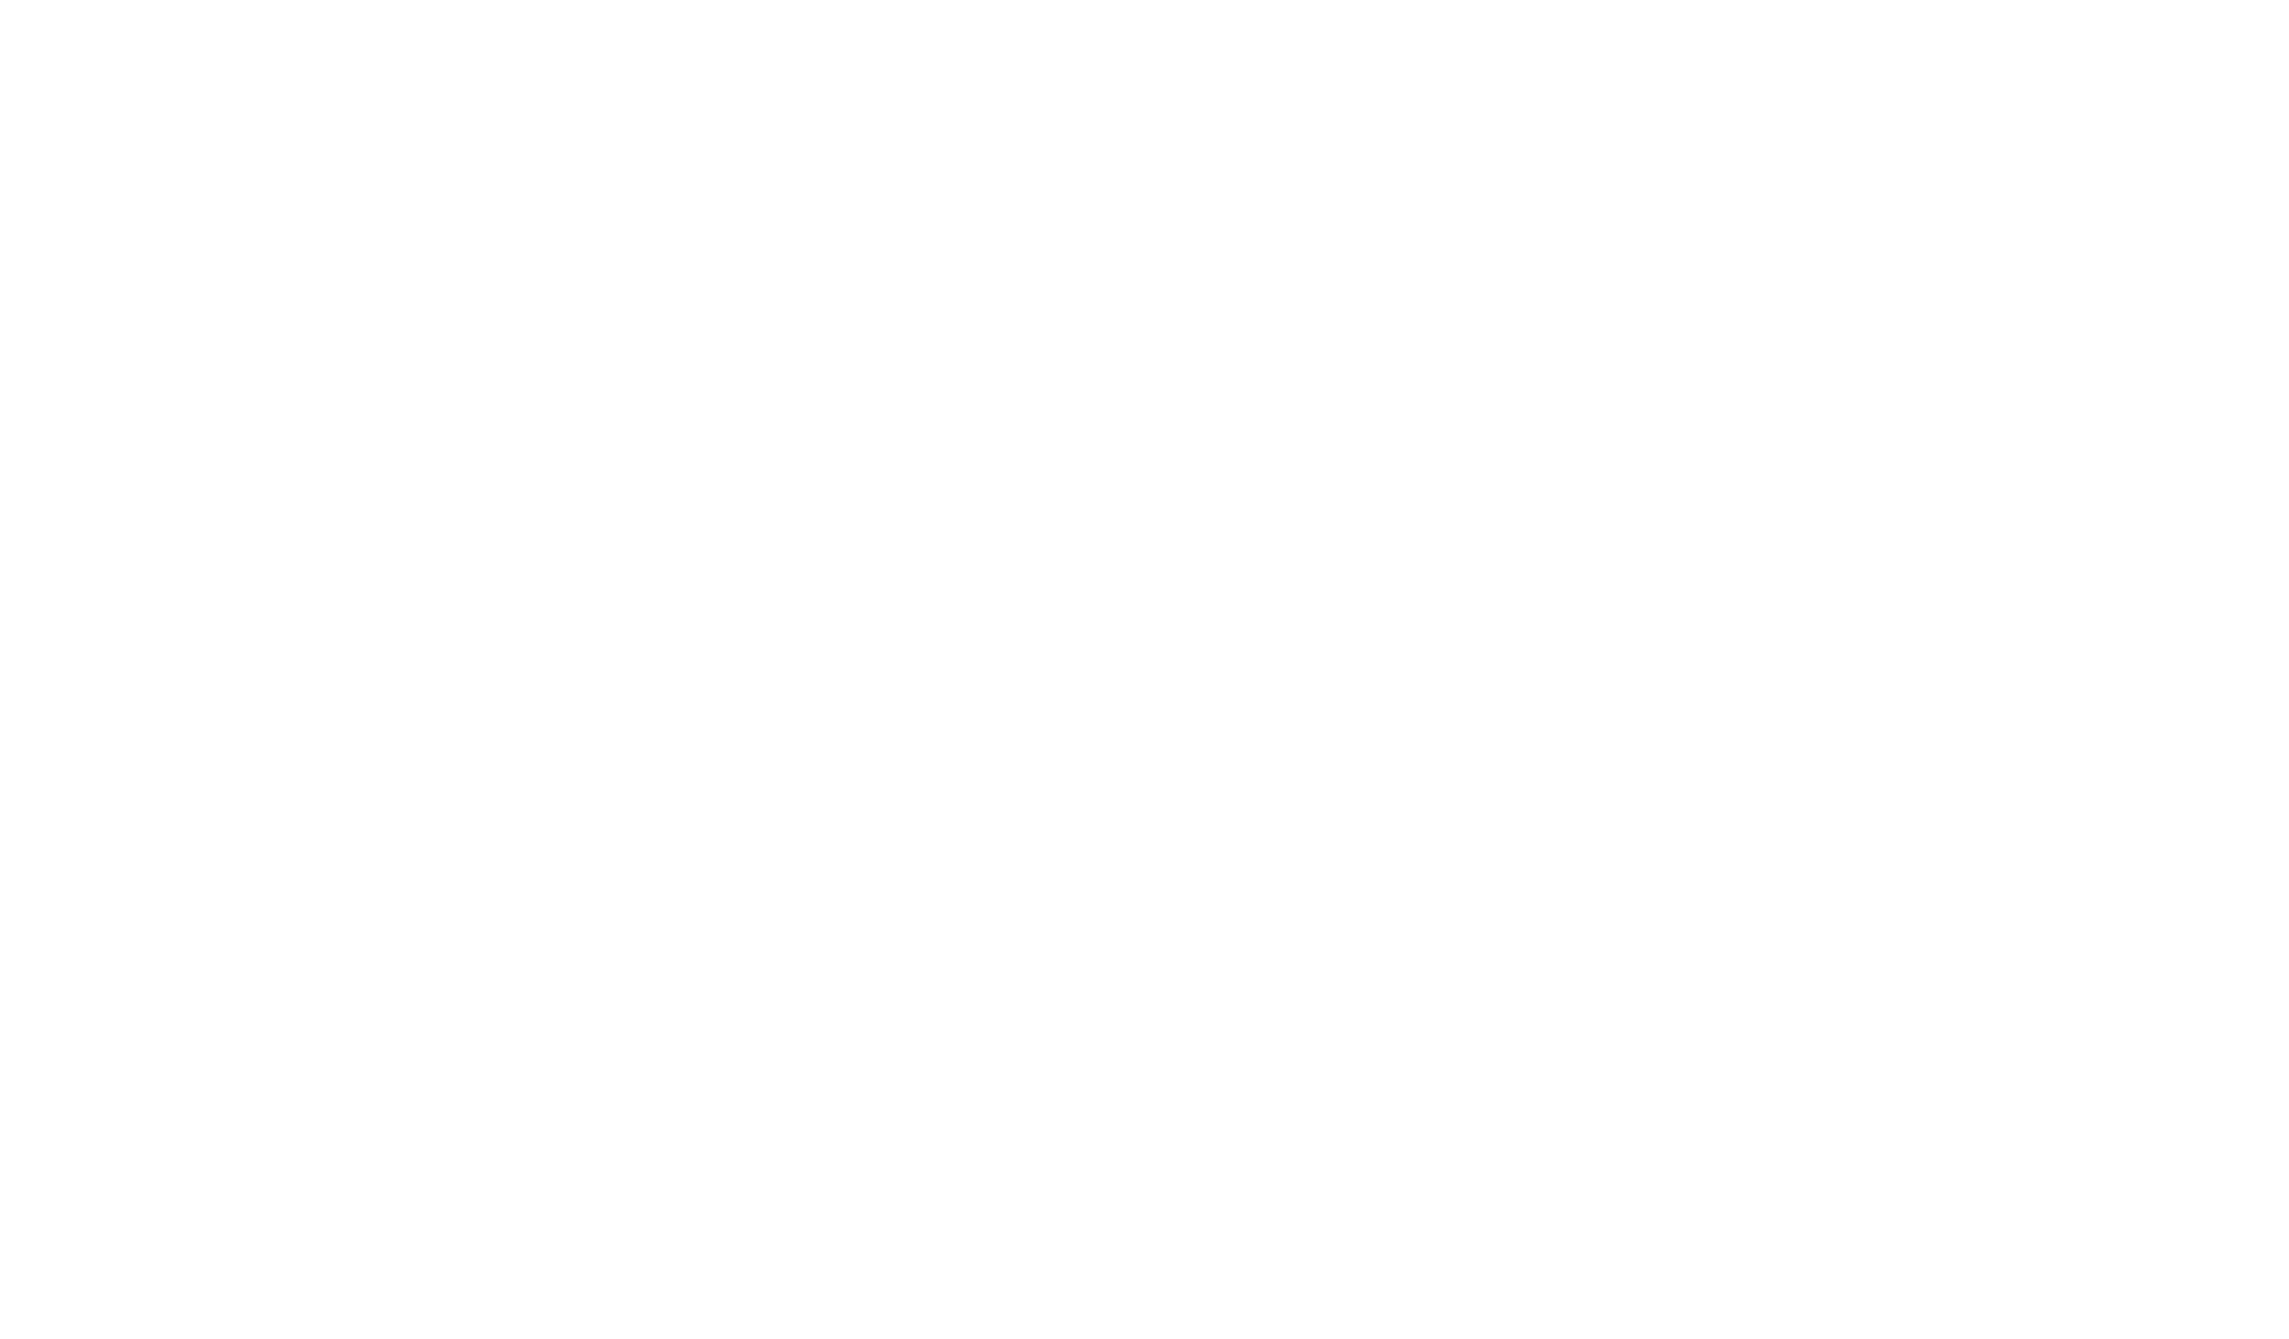 ra-tickets-white.png